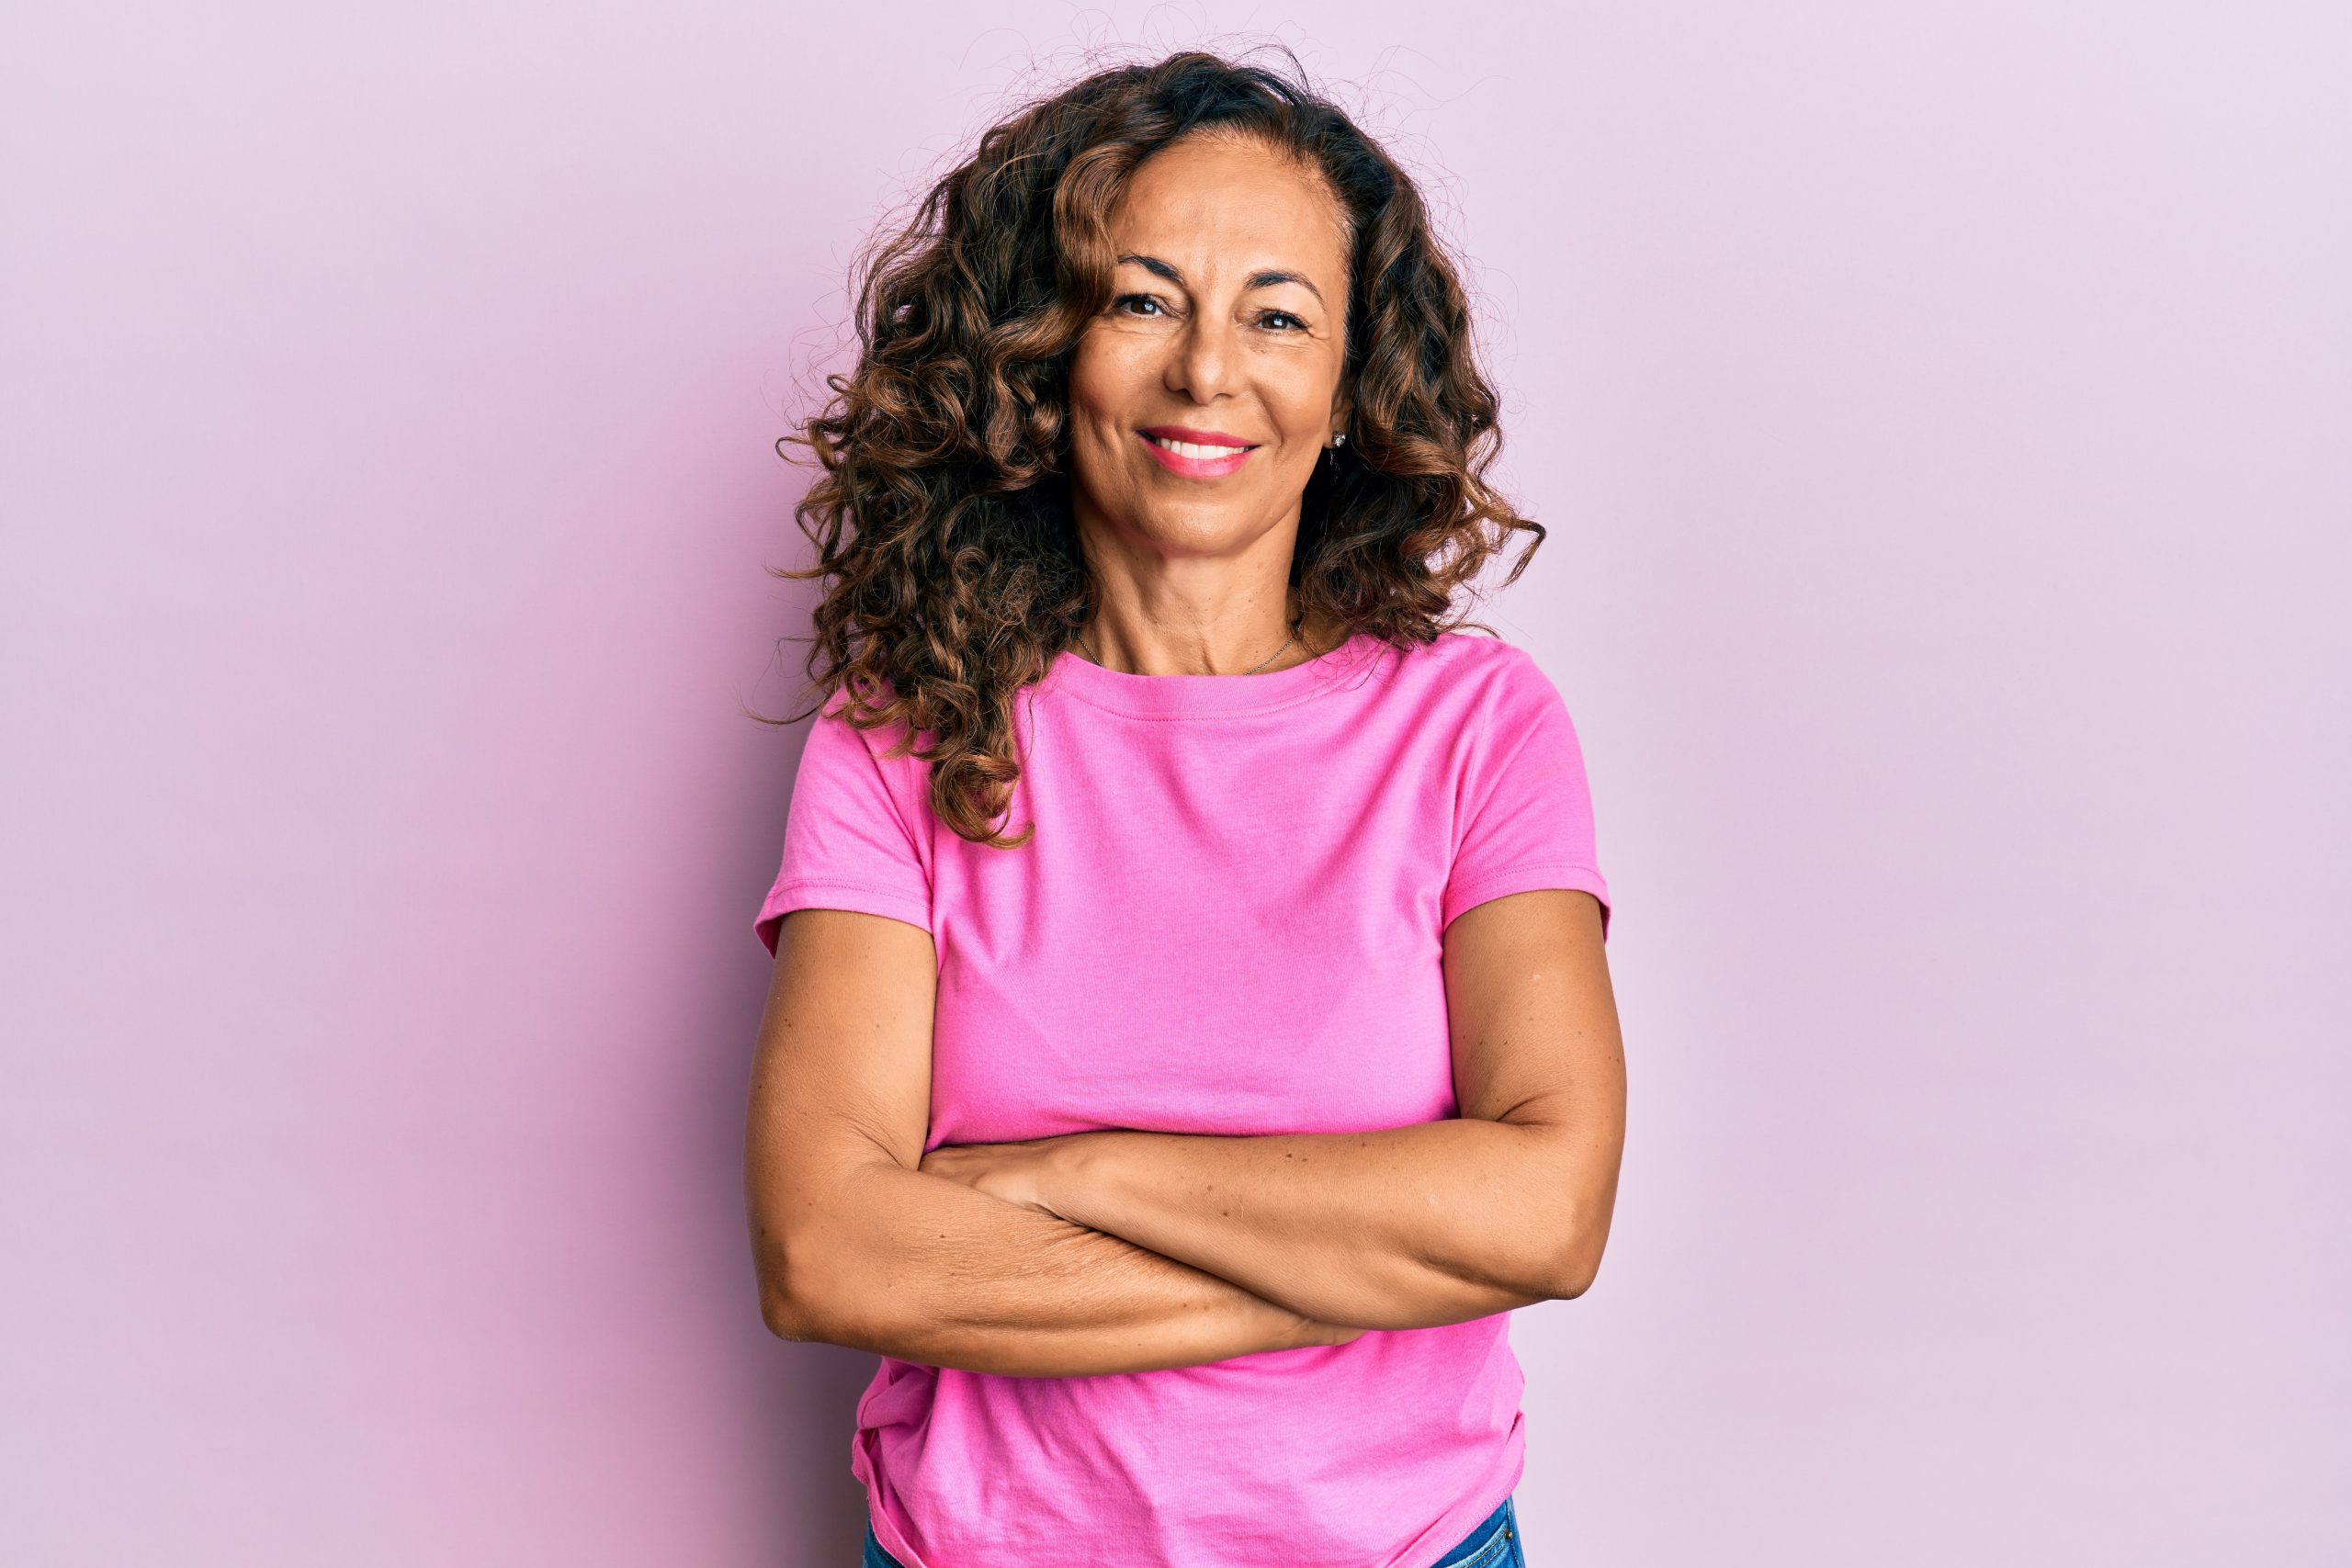 A curly haired woman in a pink shirt is smiling with her arms crossed. She is standing in front of a light purple background